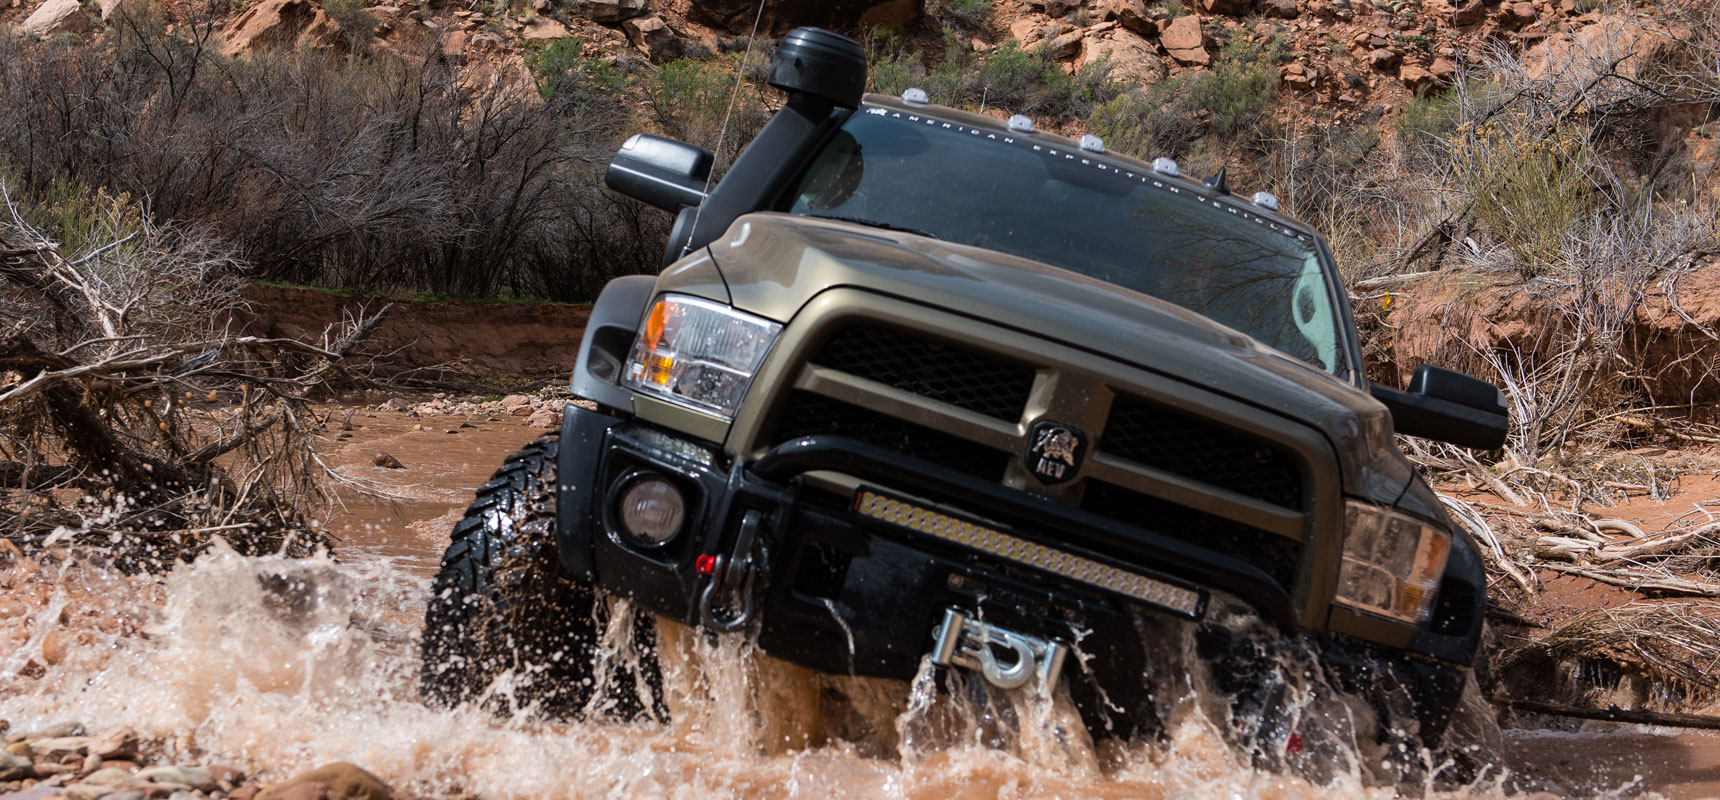 AEV DualSport Suspension overcoming an obstacle on AEV Prospector, based on the Ram heavy duty platform.